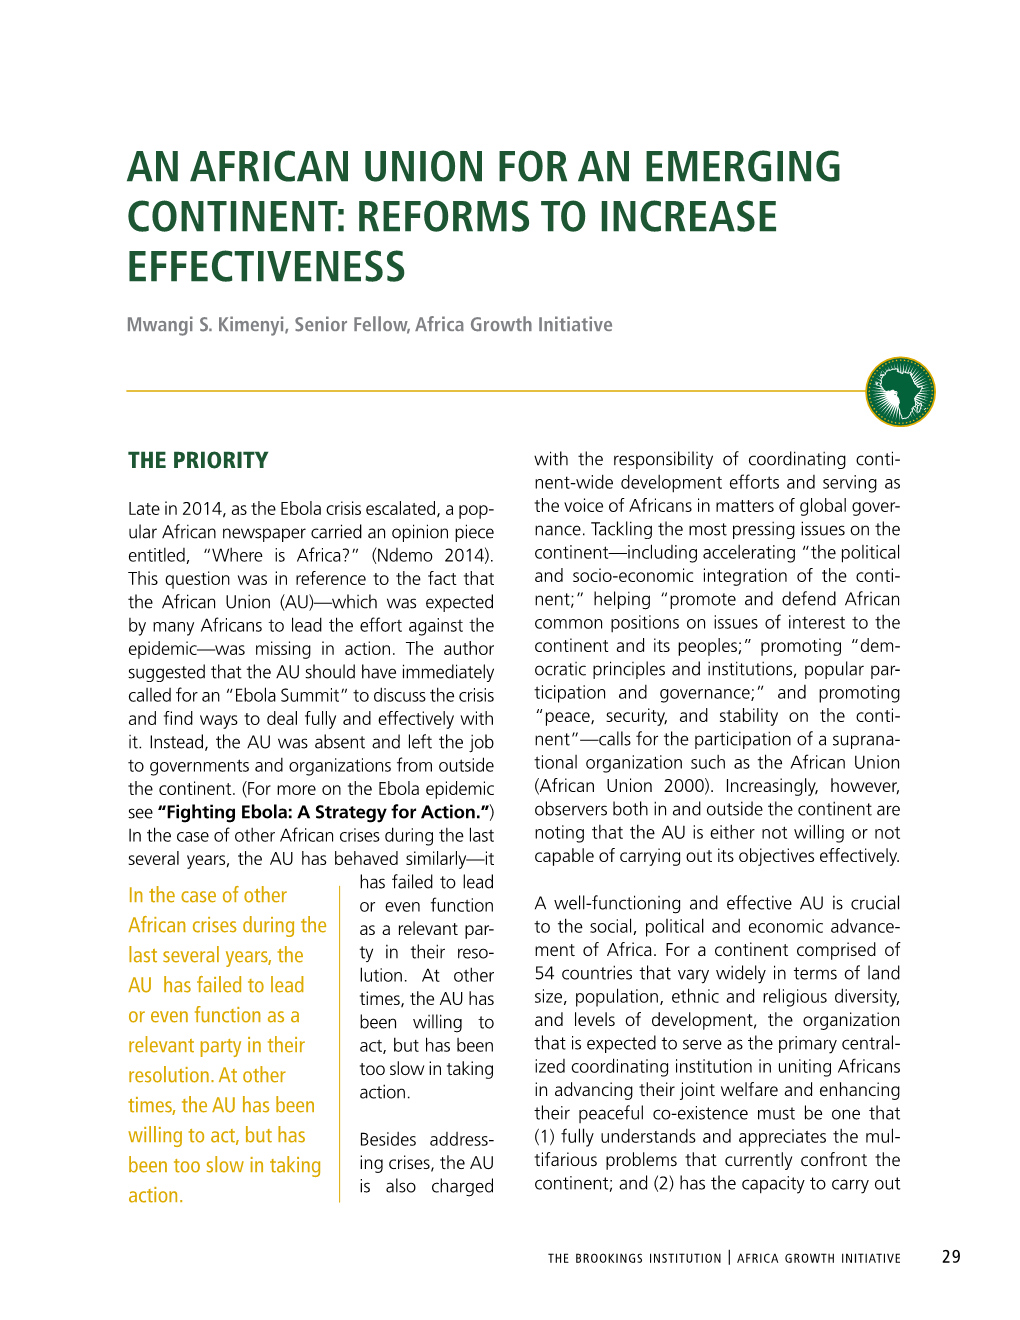 An African Union for an Emerging Continent: Reforms to Increase Effectiveness